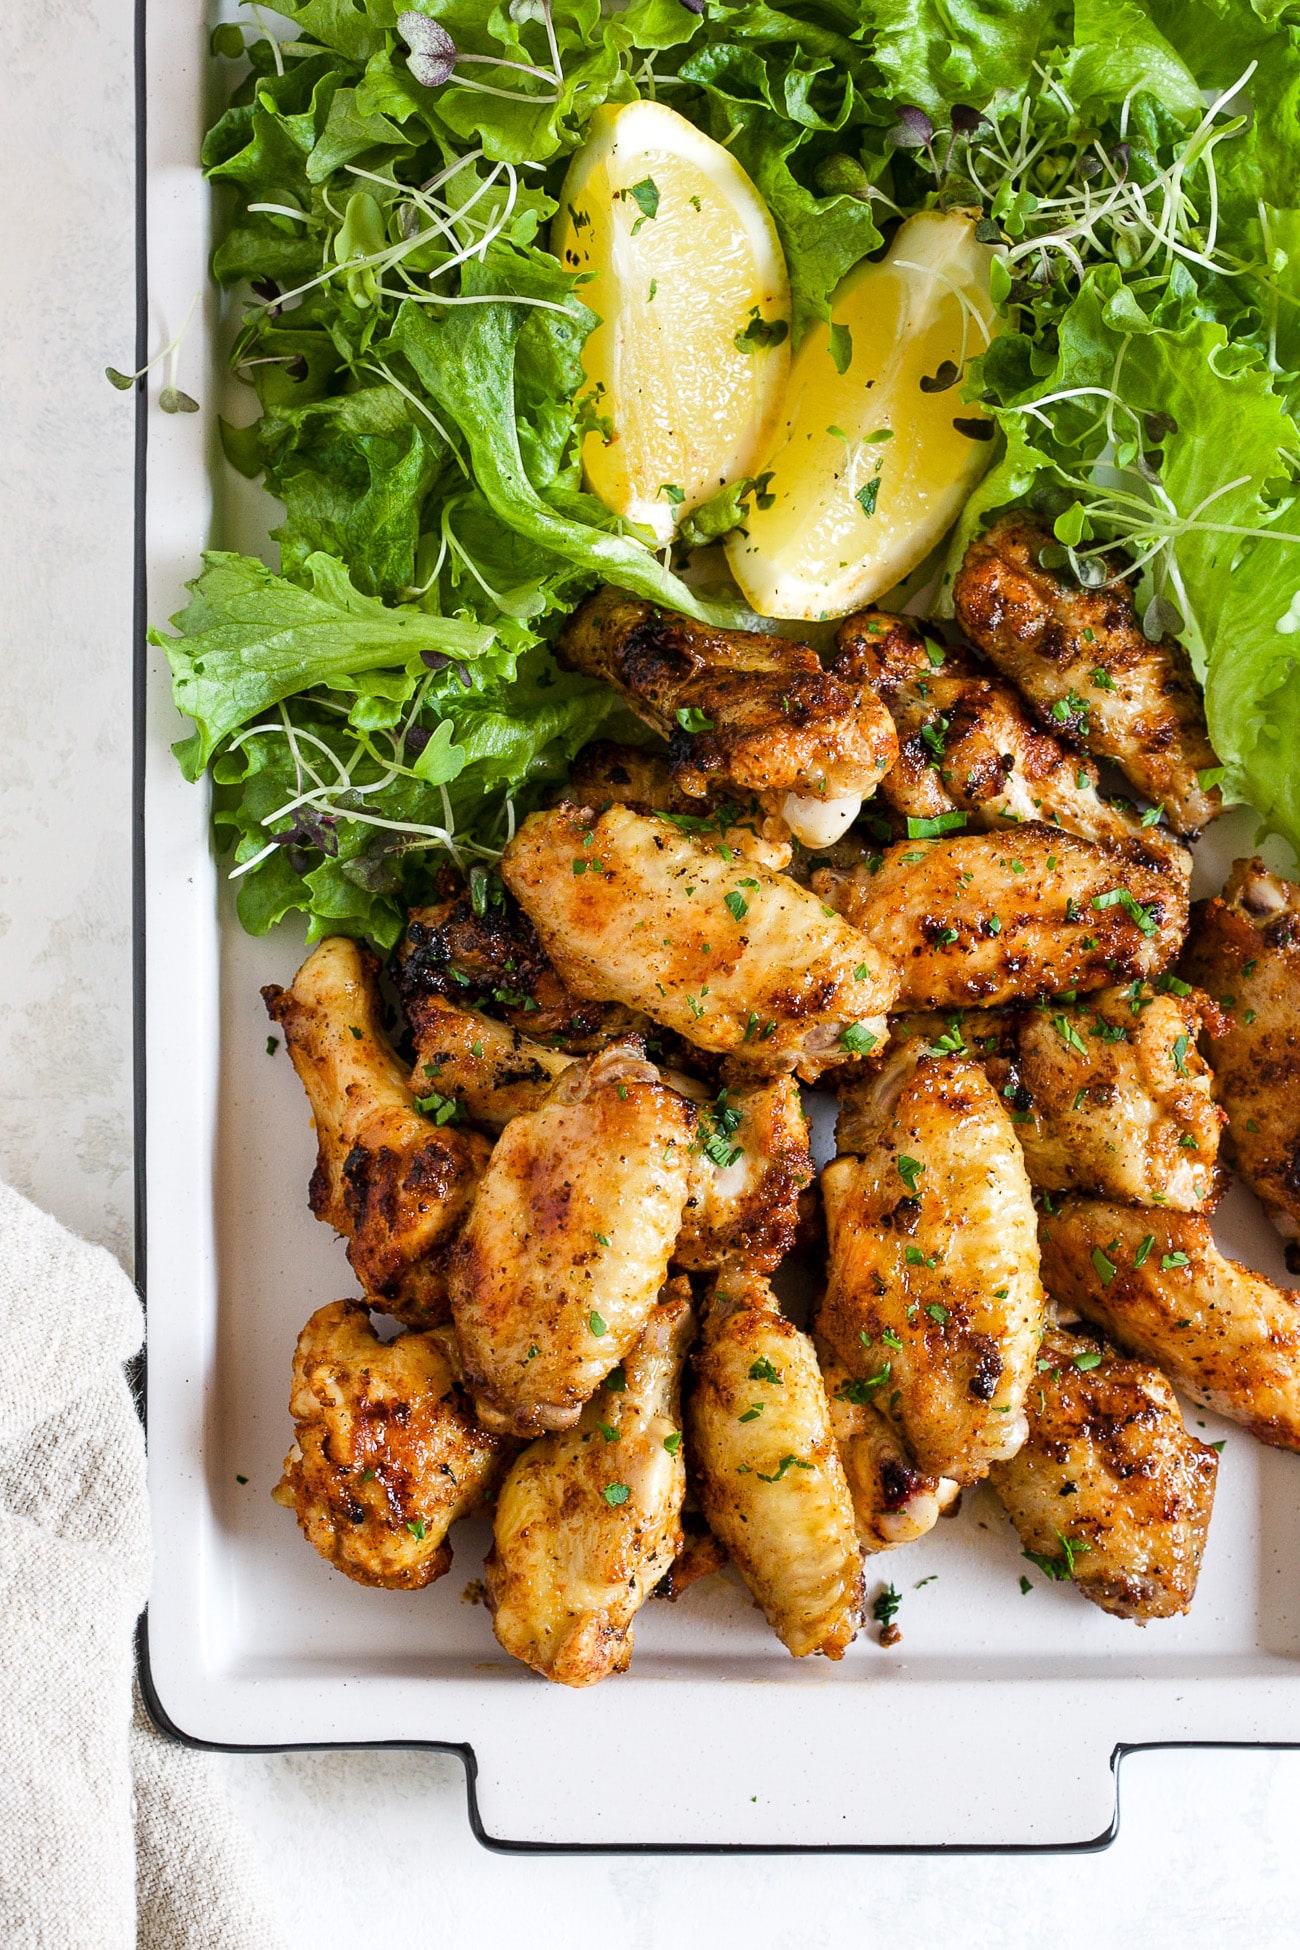 grilled chicken wings on a white platter next to greens and lemon slices